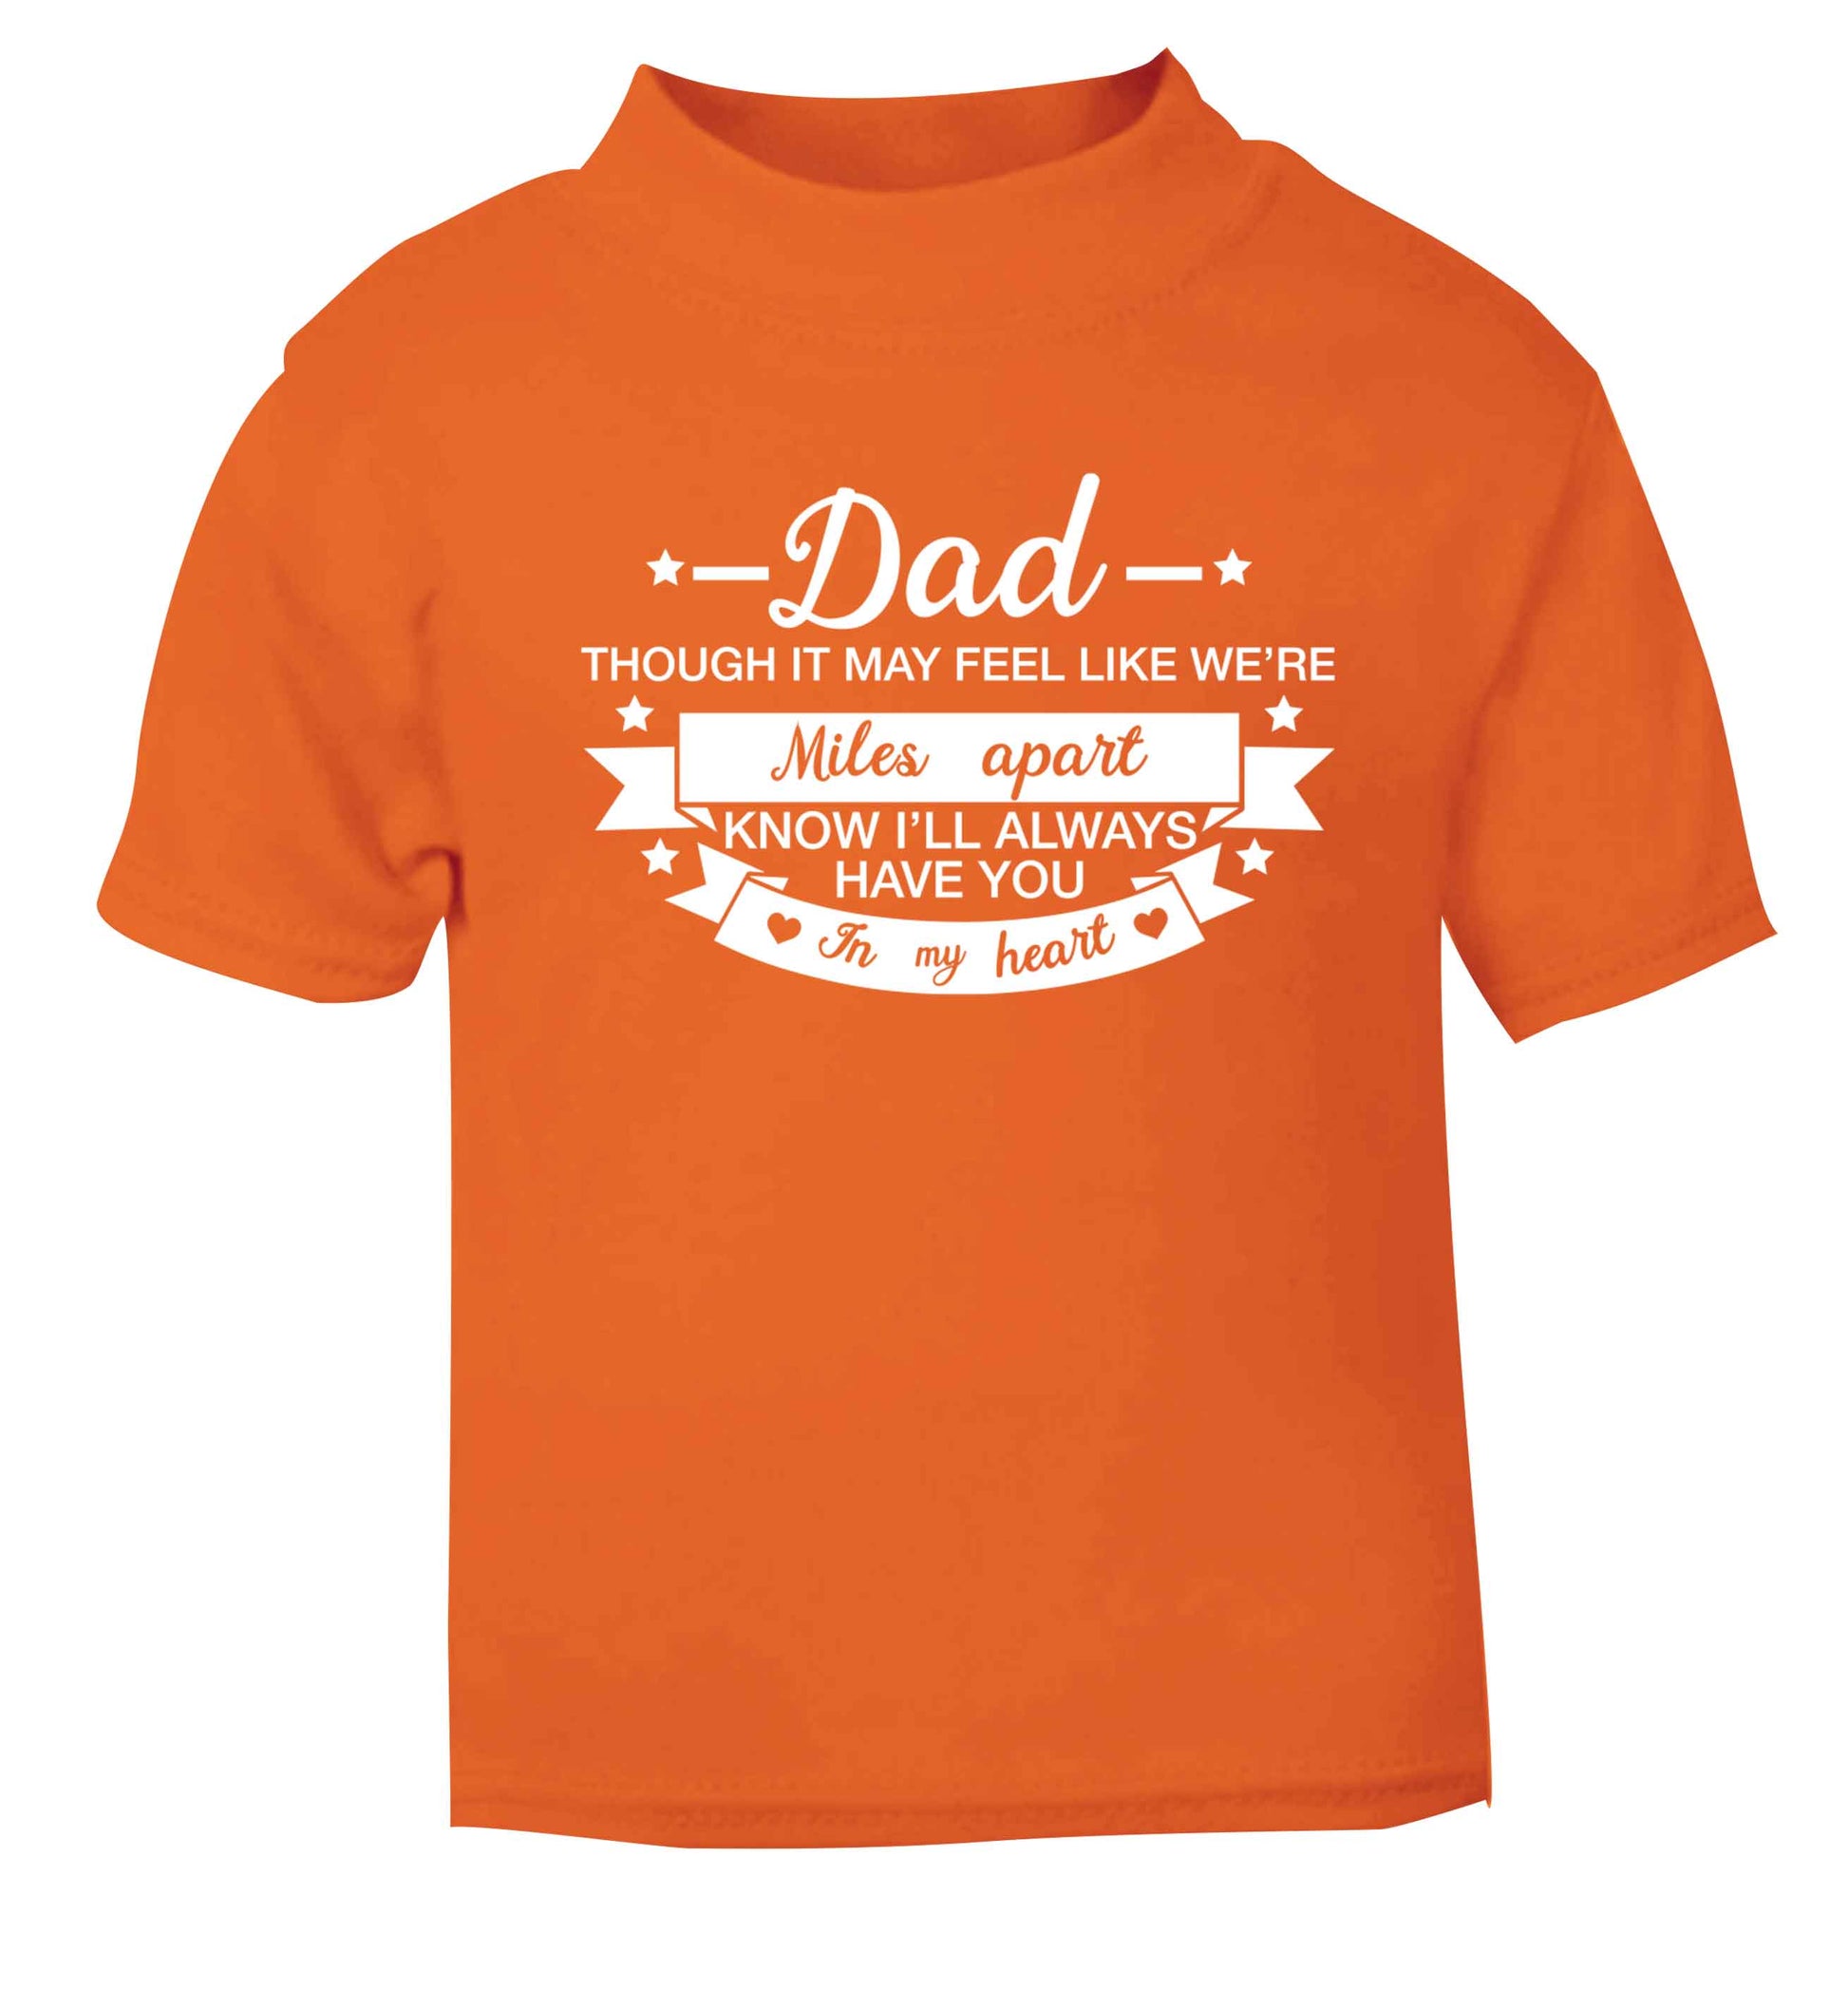 Dad though it may feel like we're miles apart know I'll always have you in my heart orange baby toddler Tshirt 2 Years